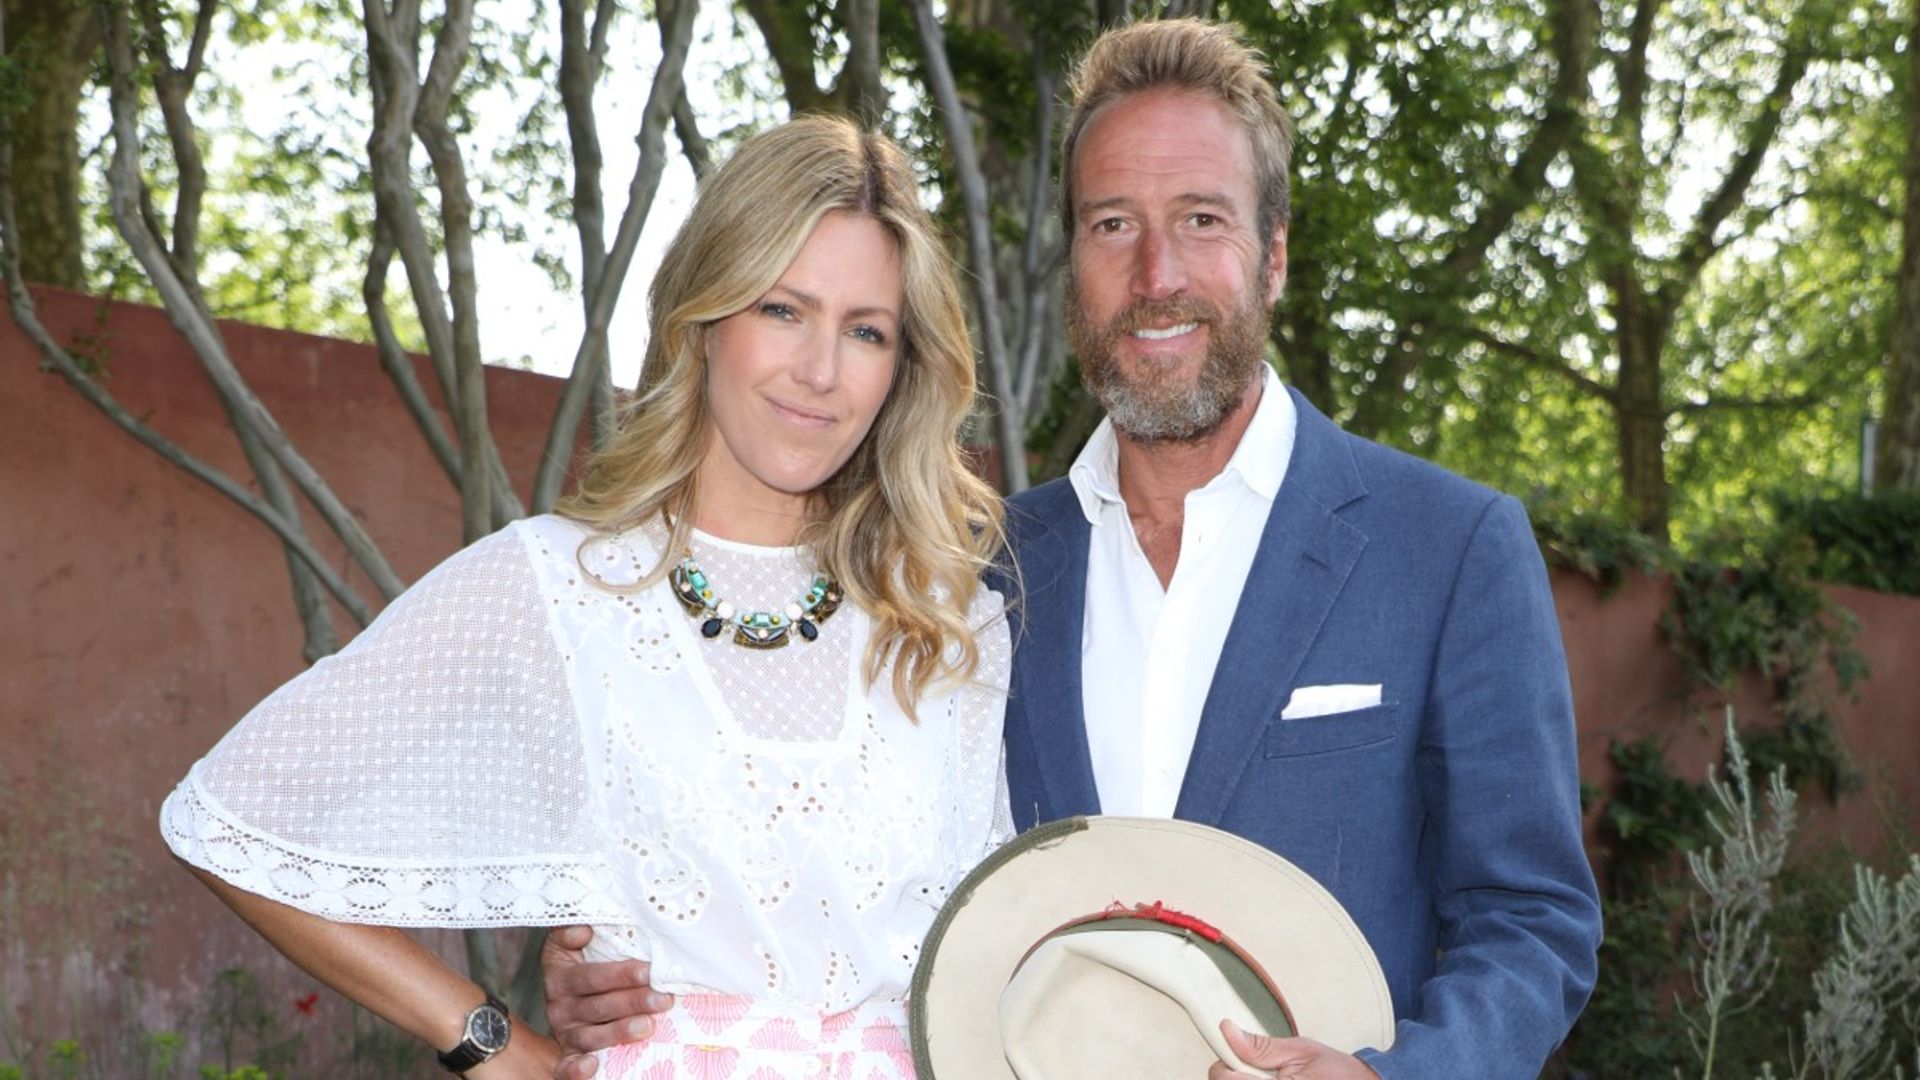 Ben Fogle reveals his special annual tradition with wife Marina in lovely tribute